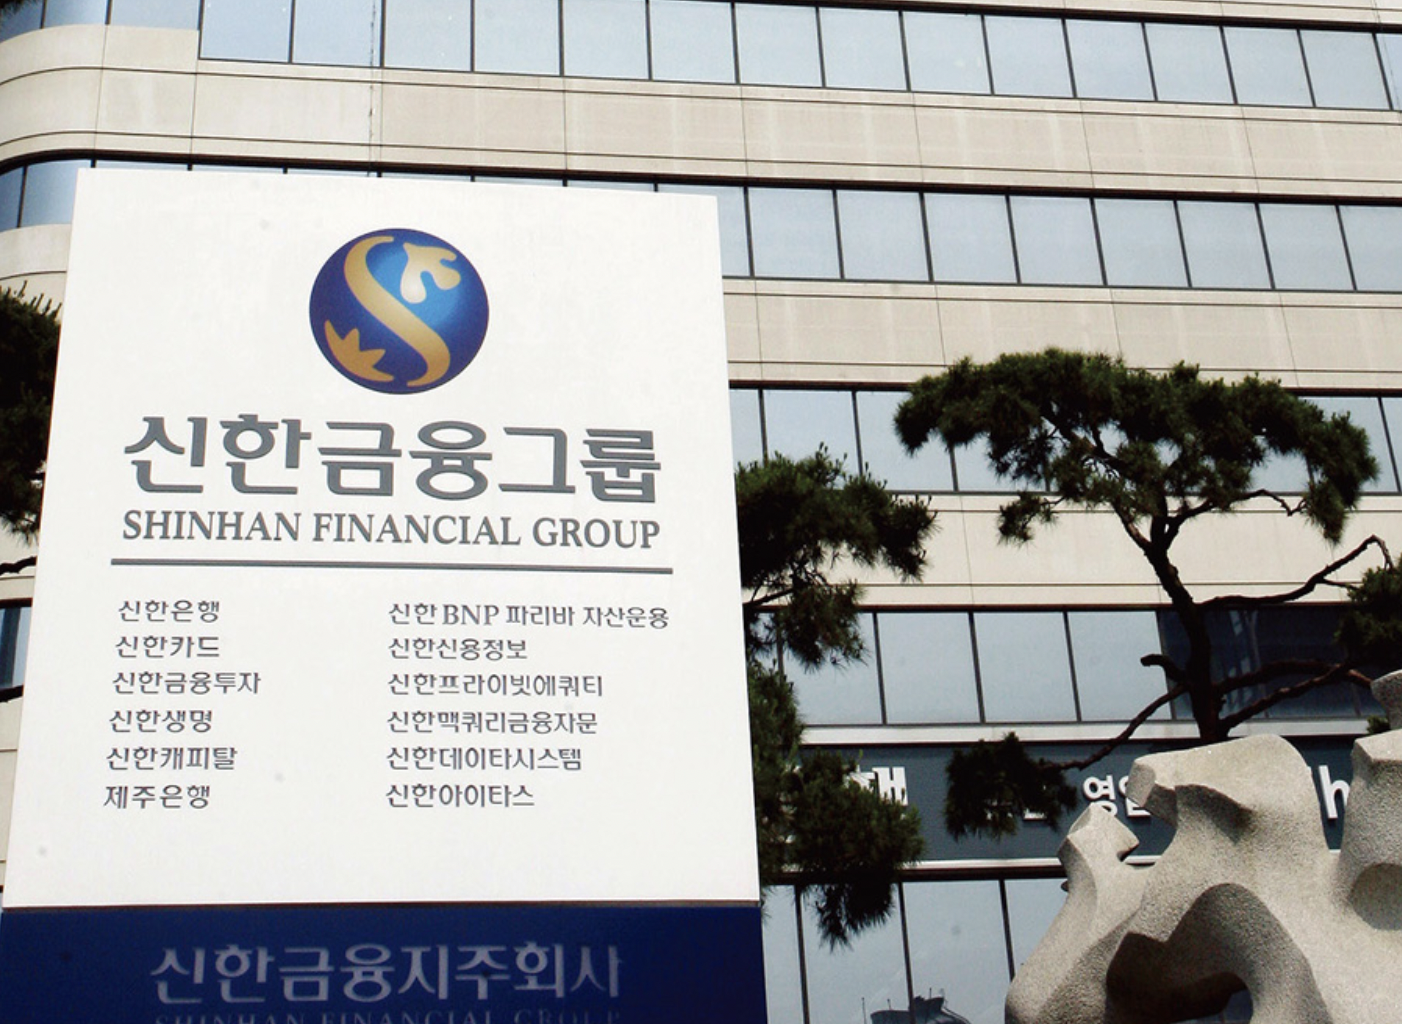 Shinhan Financial Group launches $36.5 million fund to invest in